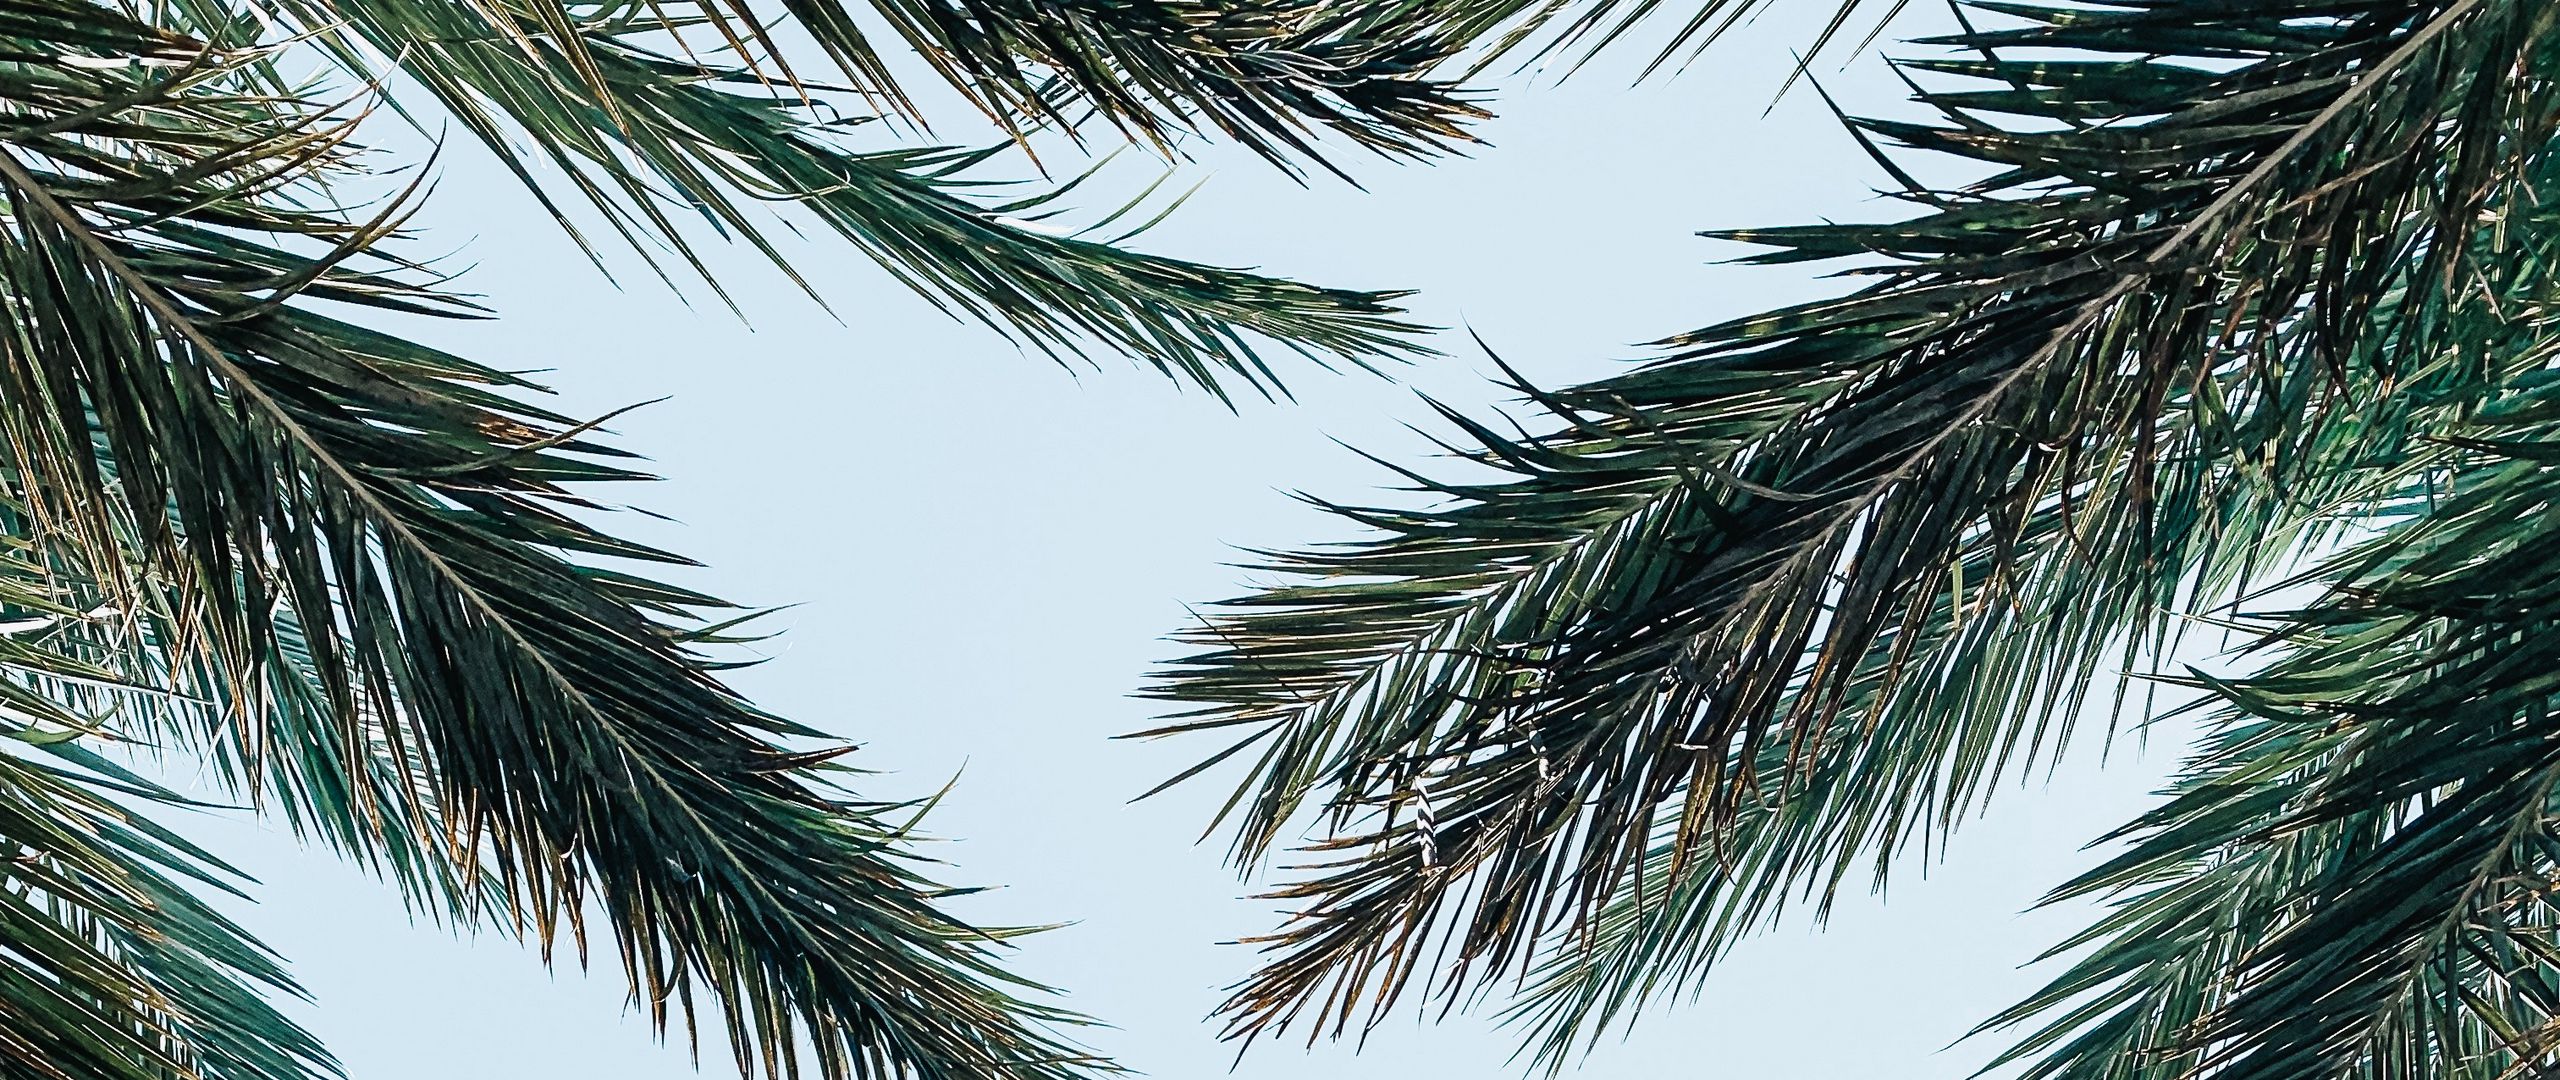 Download wallpaper 2560x1080 palm tree, branches, leaves, sky, bottom